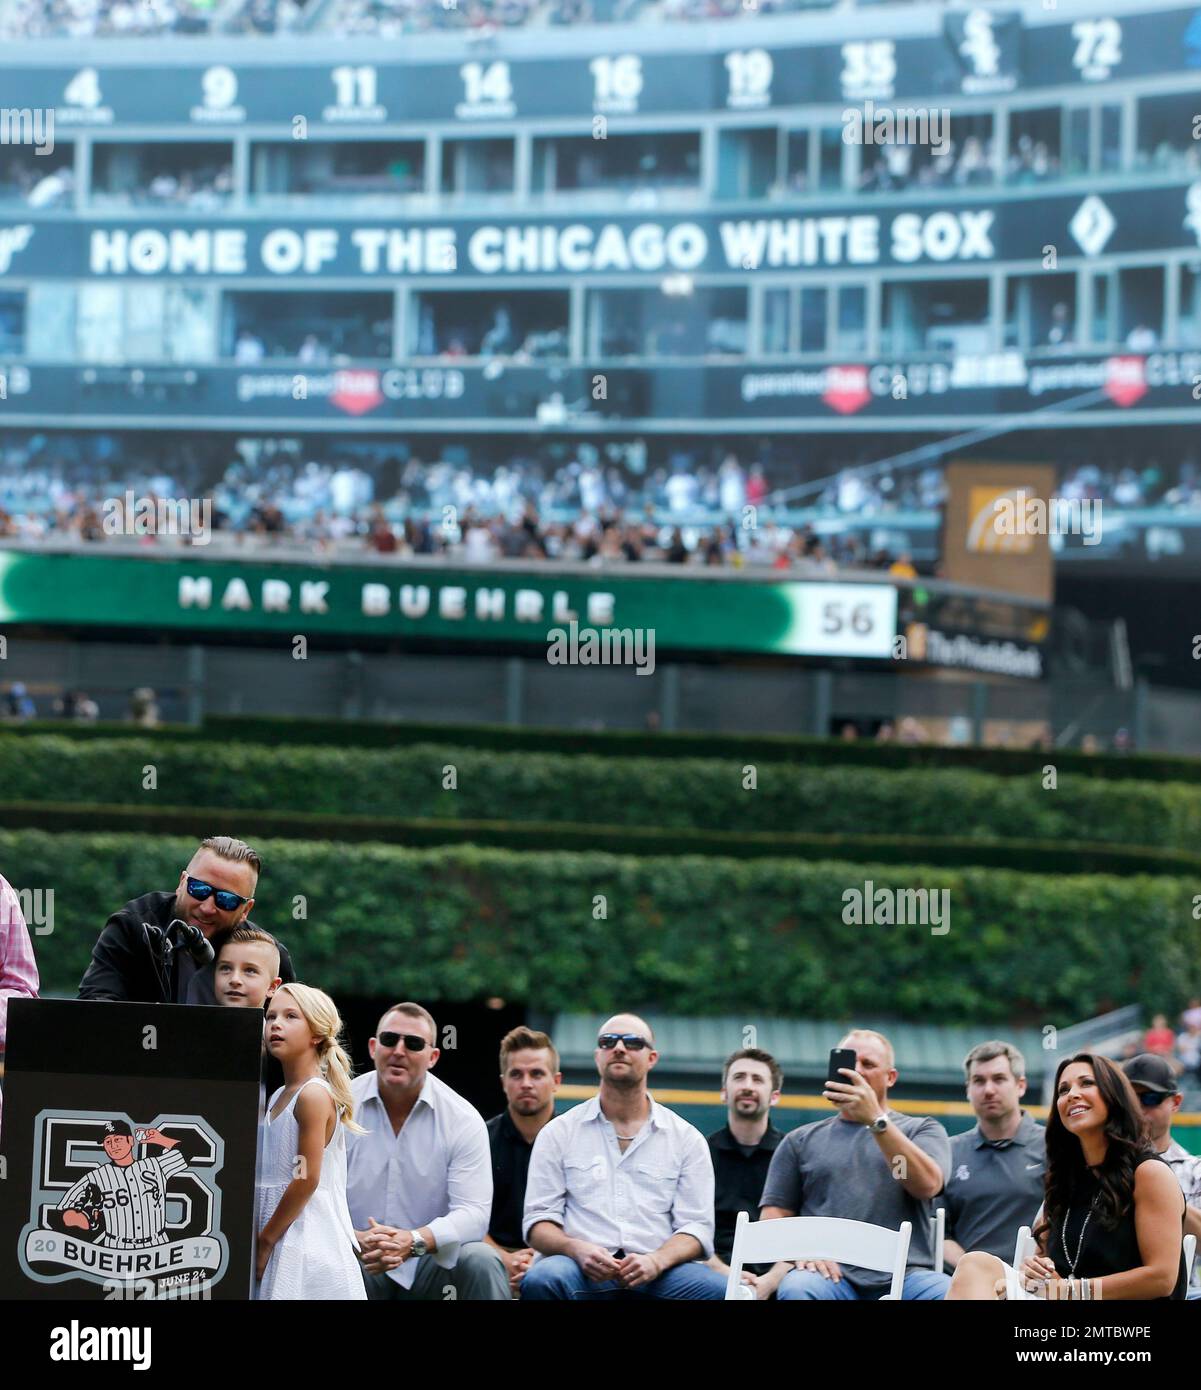 CSN Chicago To Honor White Sox Legend Mark Buehrle With Live